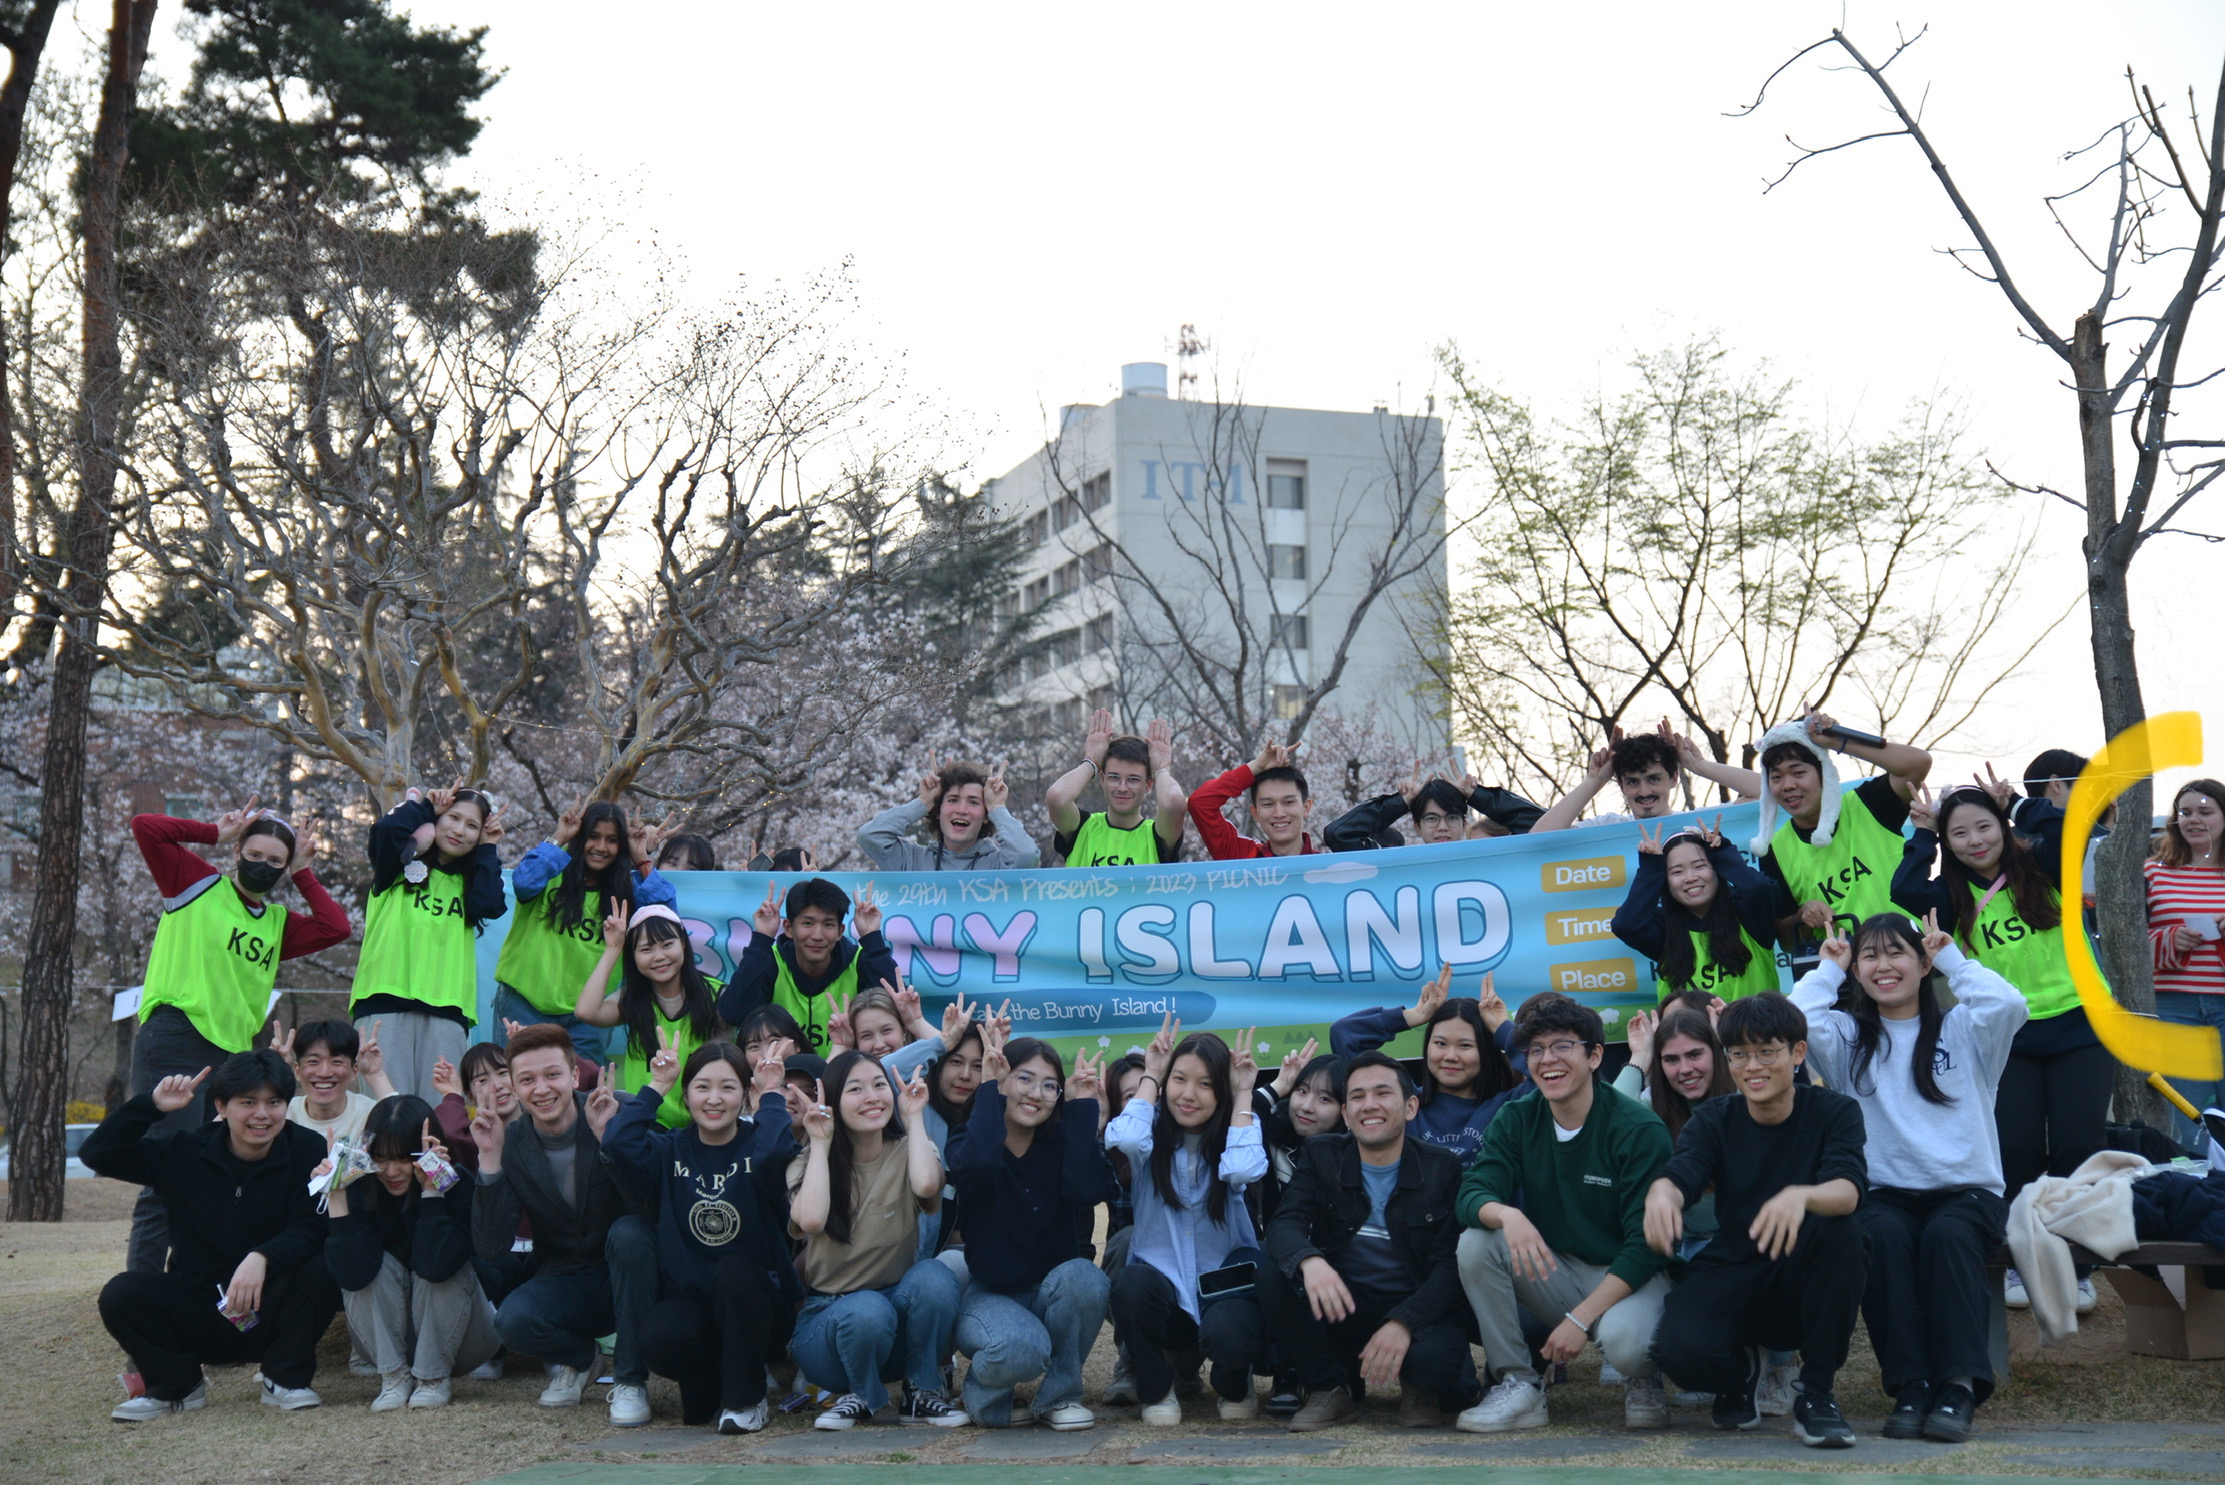 2023 PICNIC at Central Park "BUNNY ISLAND" 관련 이미지입니다